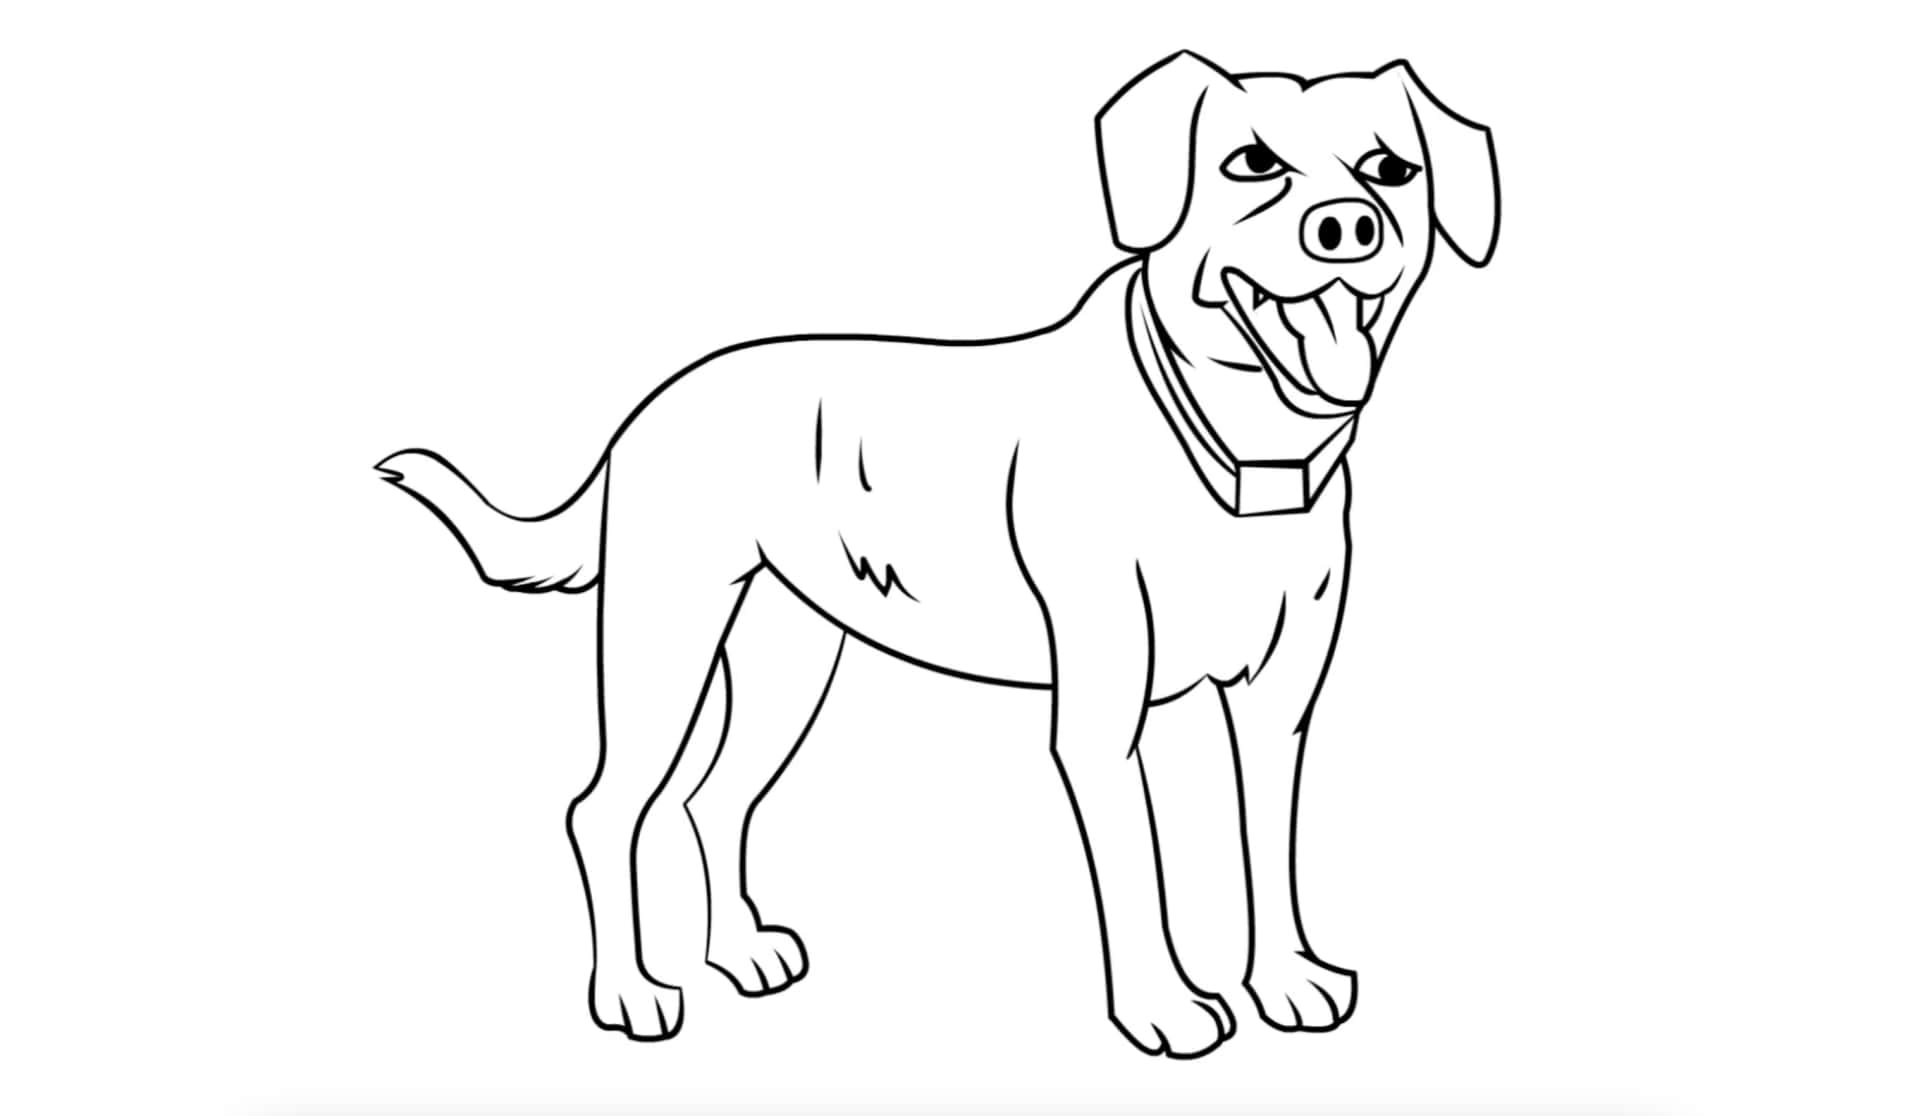 Simple dog doodle wins drawing contest and also people's hearts - The  Online Citizen